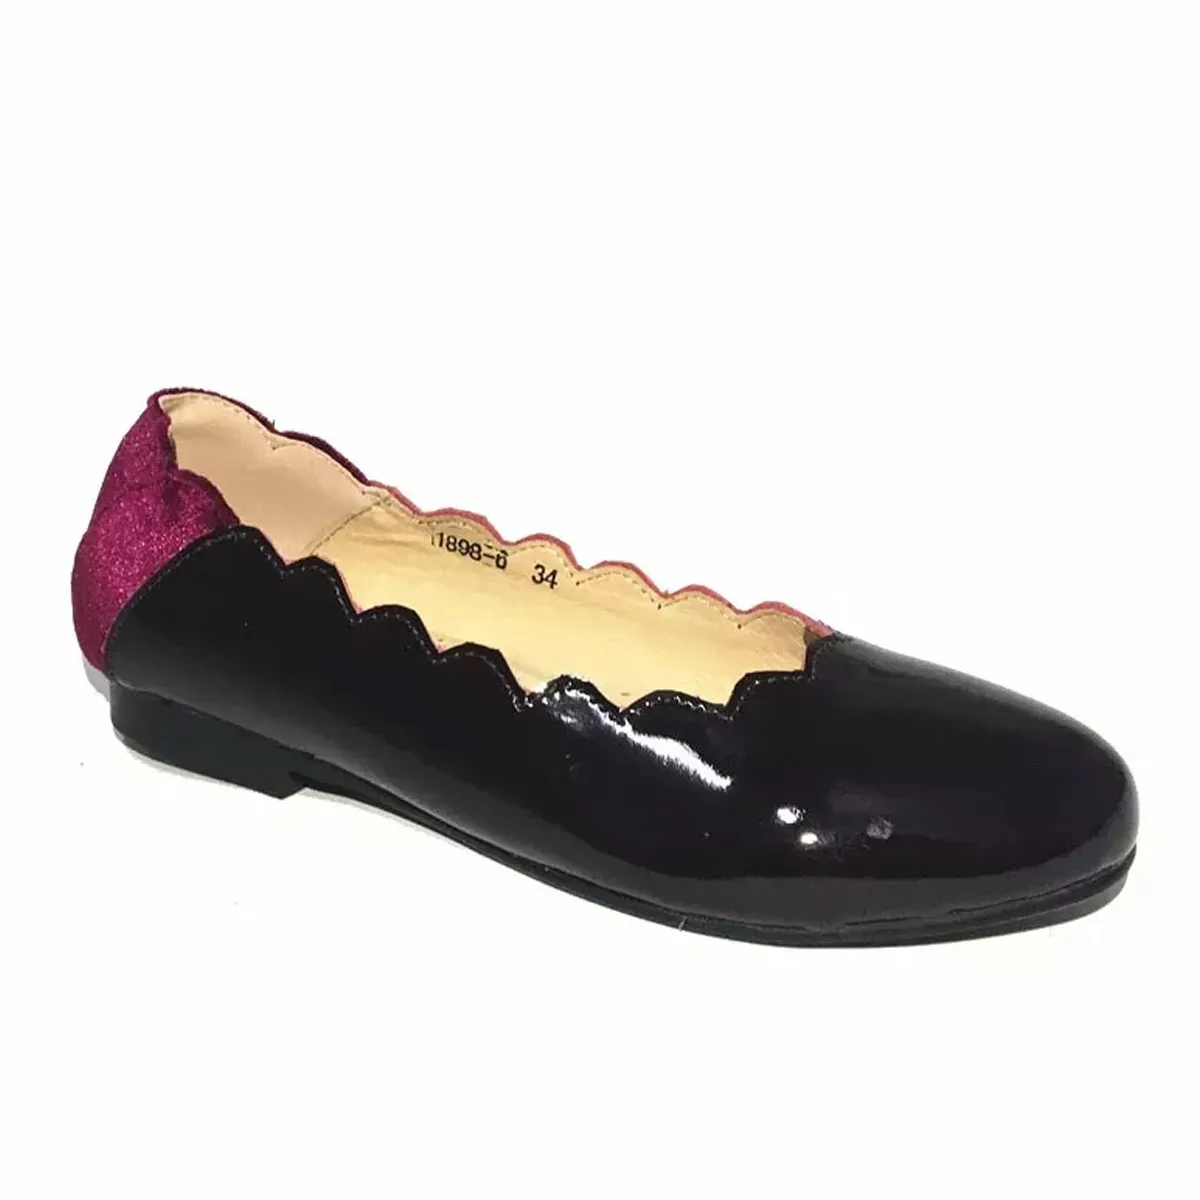 Ballerina woman's shoes ladies flats with pearls Casual new design women shoes